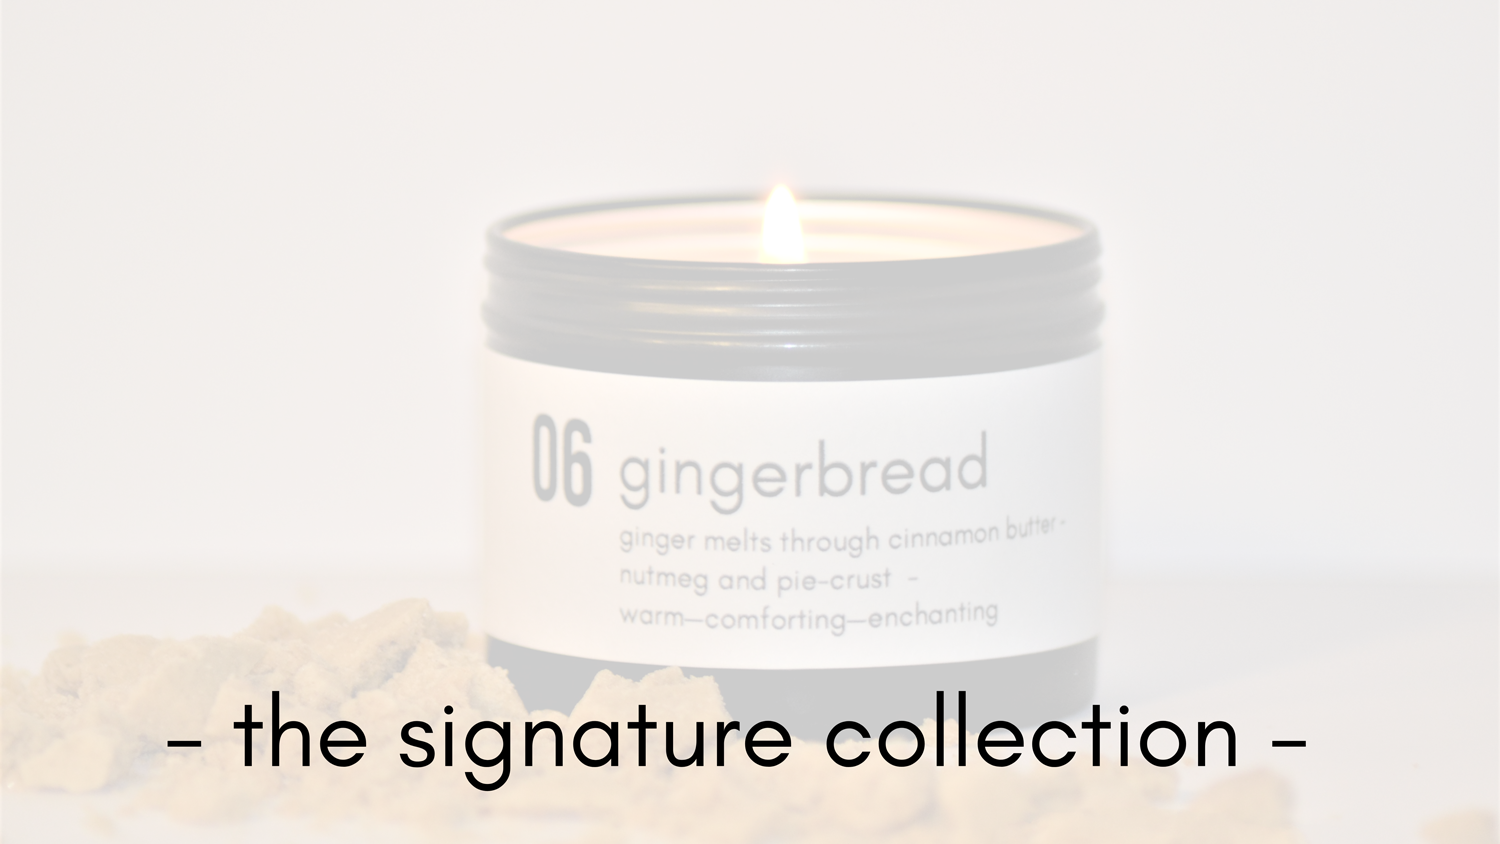 Carl Mullaney London - The Signature Collection - 06 Gingerbread - soy candle